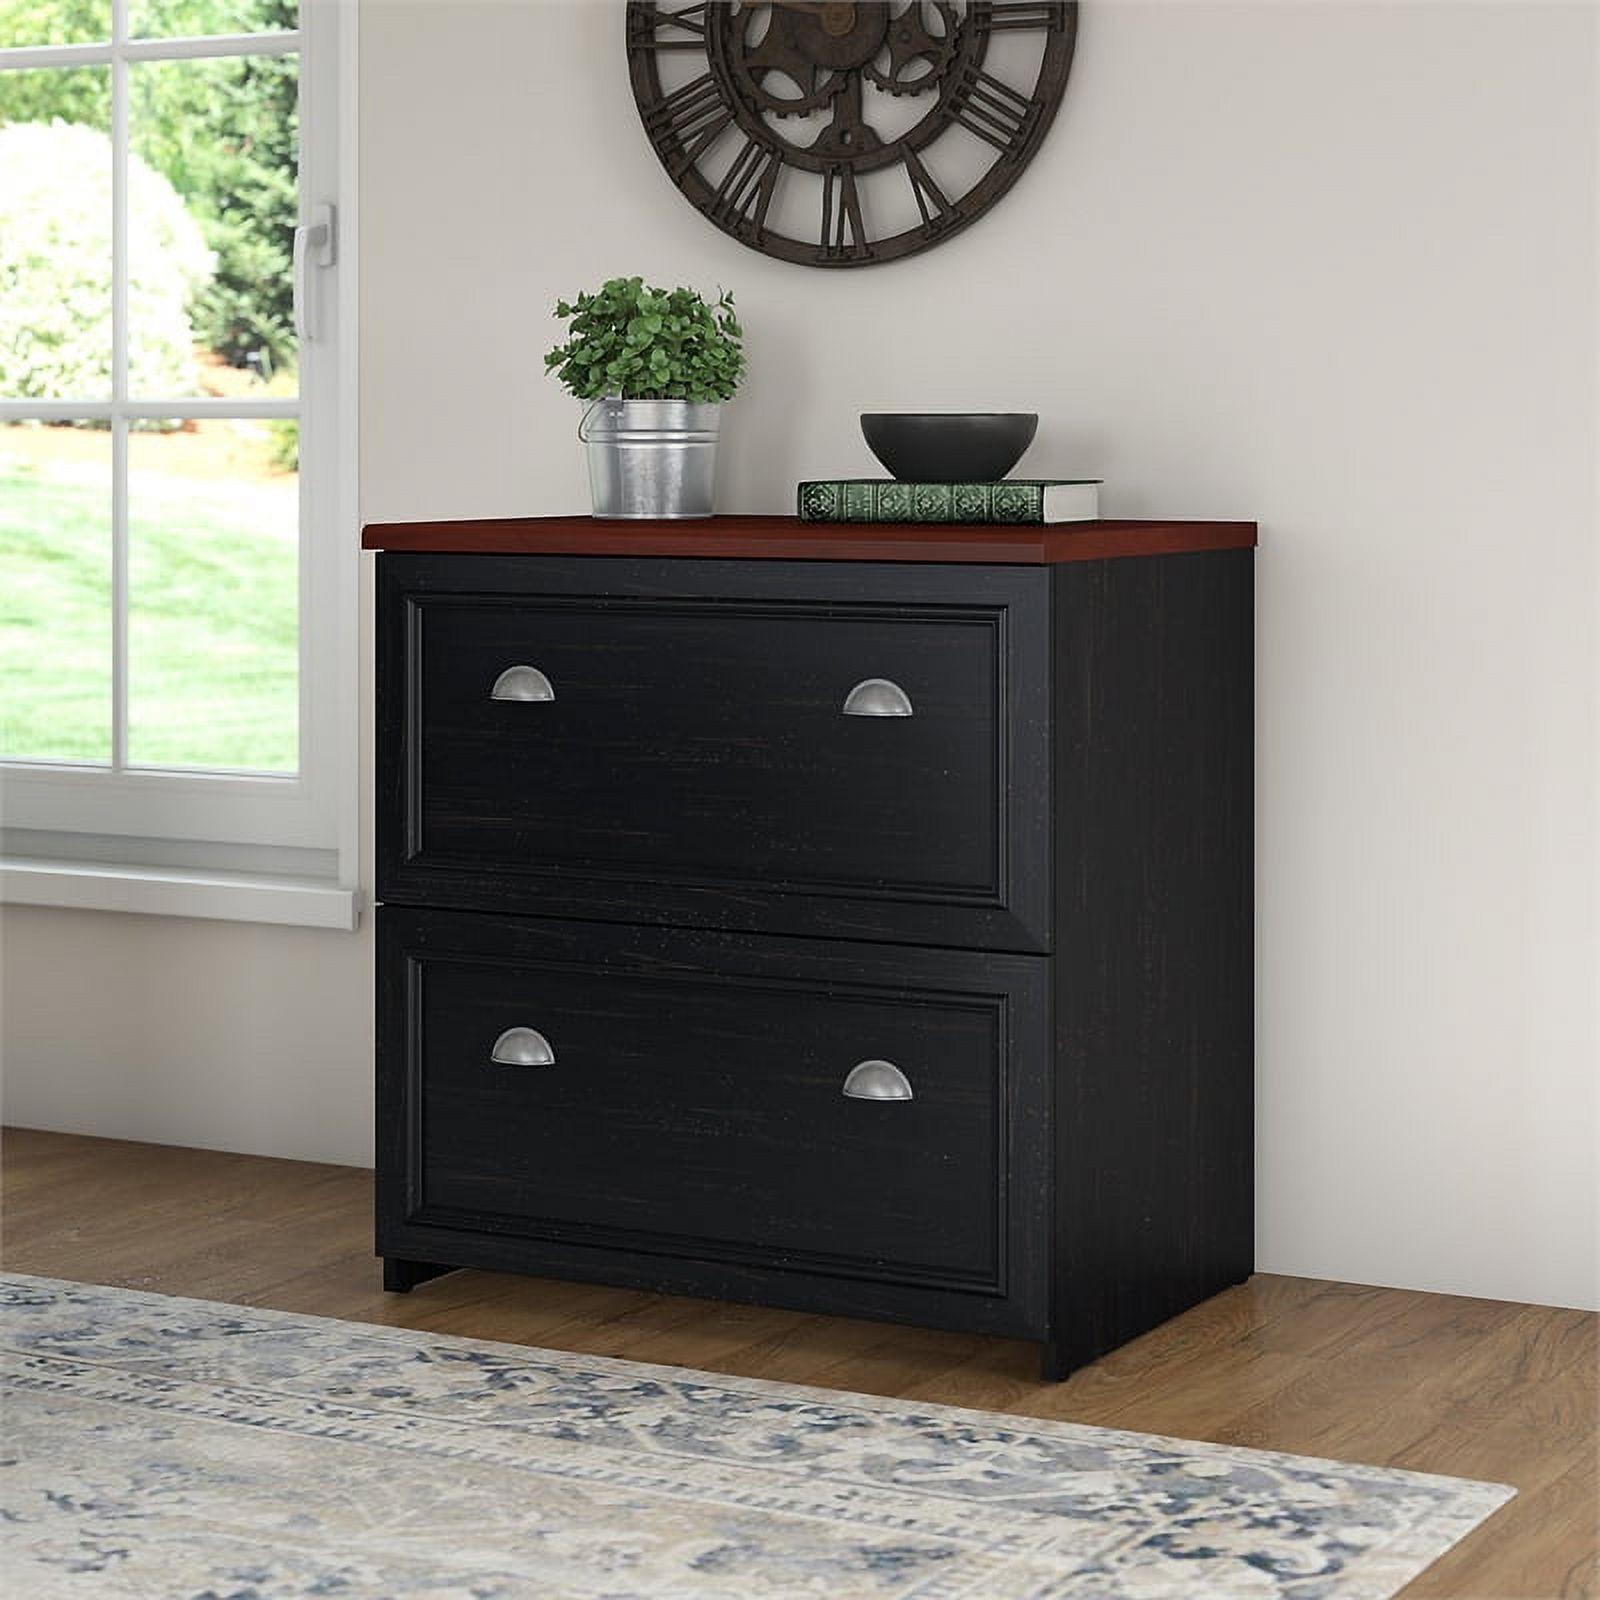 Home Square 2 Piece Engineered Wood Filing Cabinet Set in Antique Black - image 3 of 7